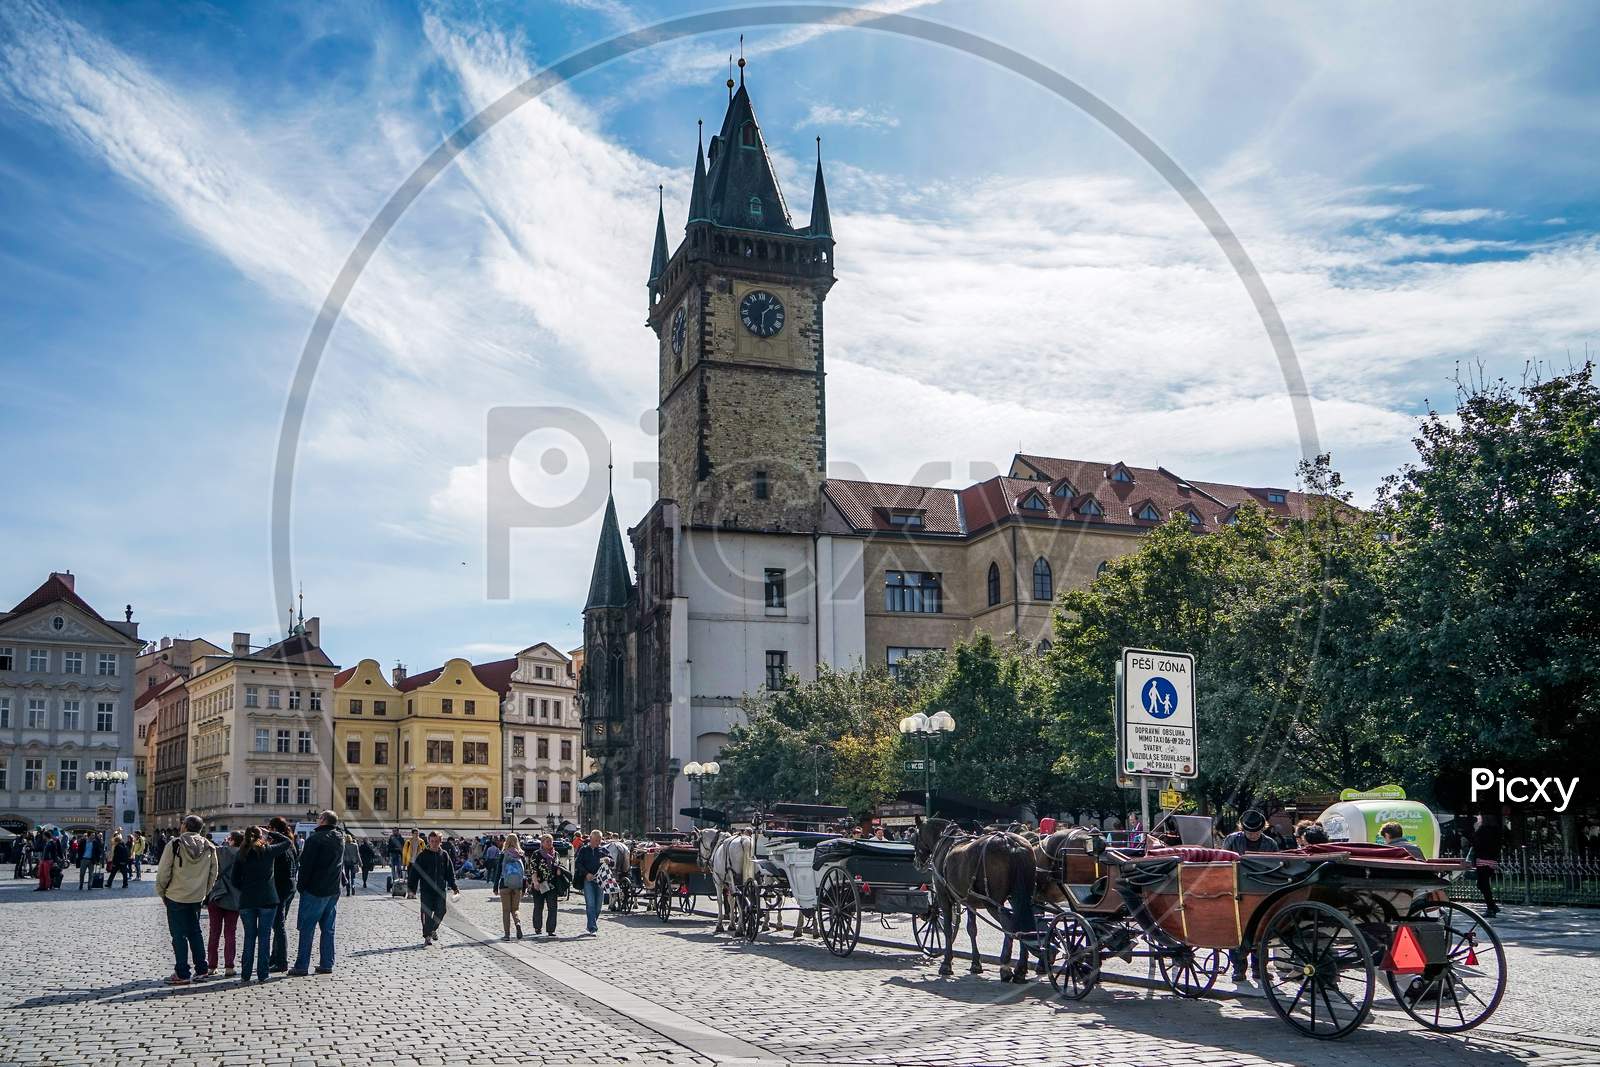 Horses And Carriages In The Old Town Square In Prague